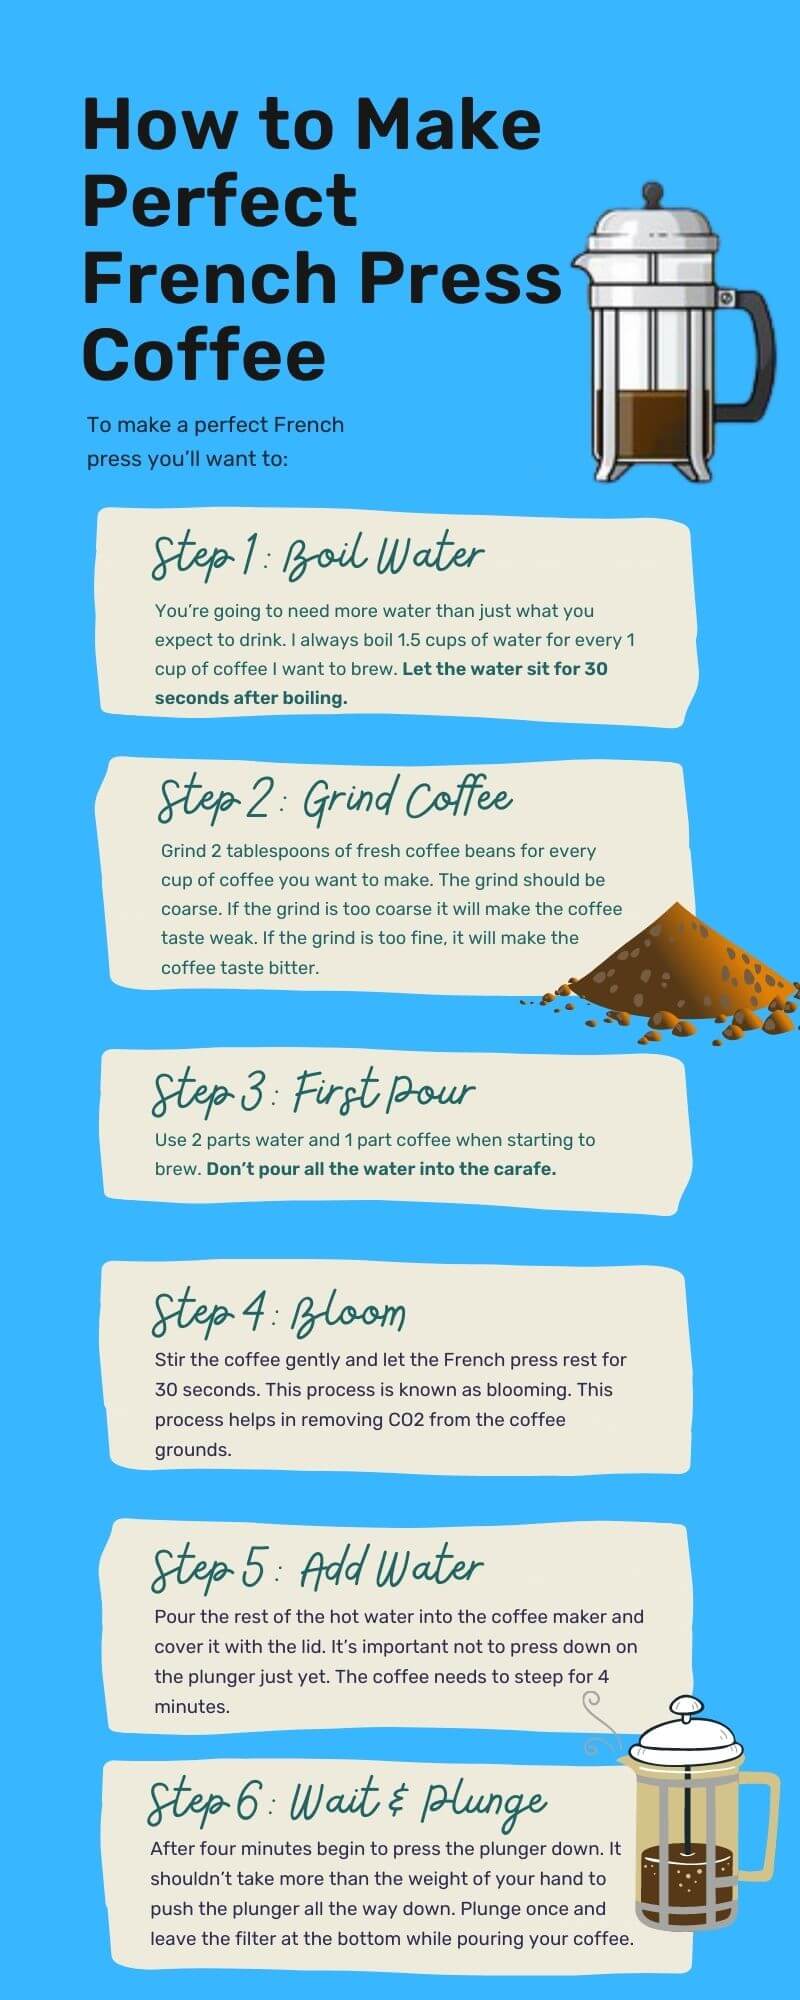 How to Make Perfect French Press Coffee